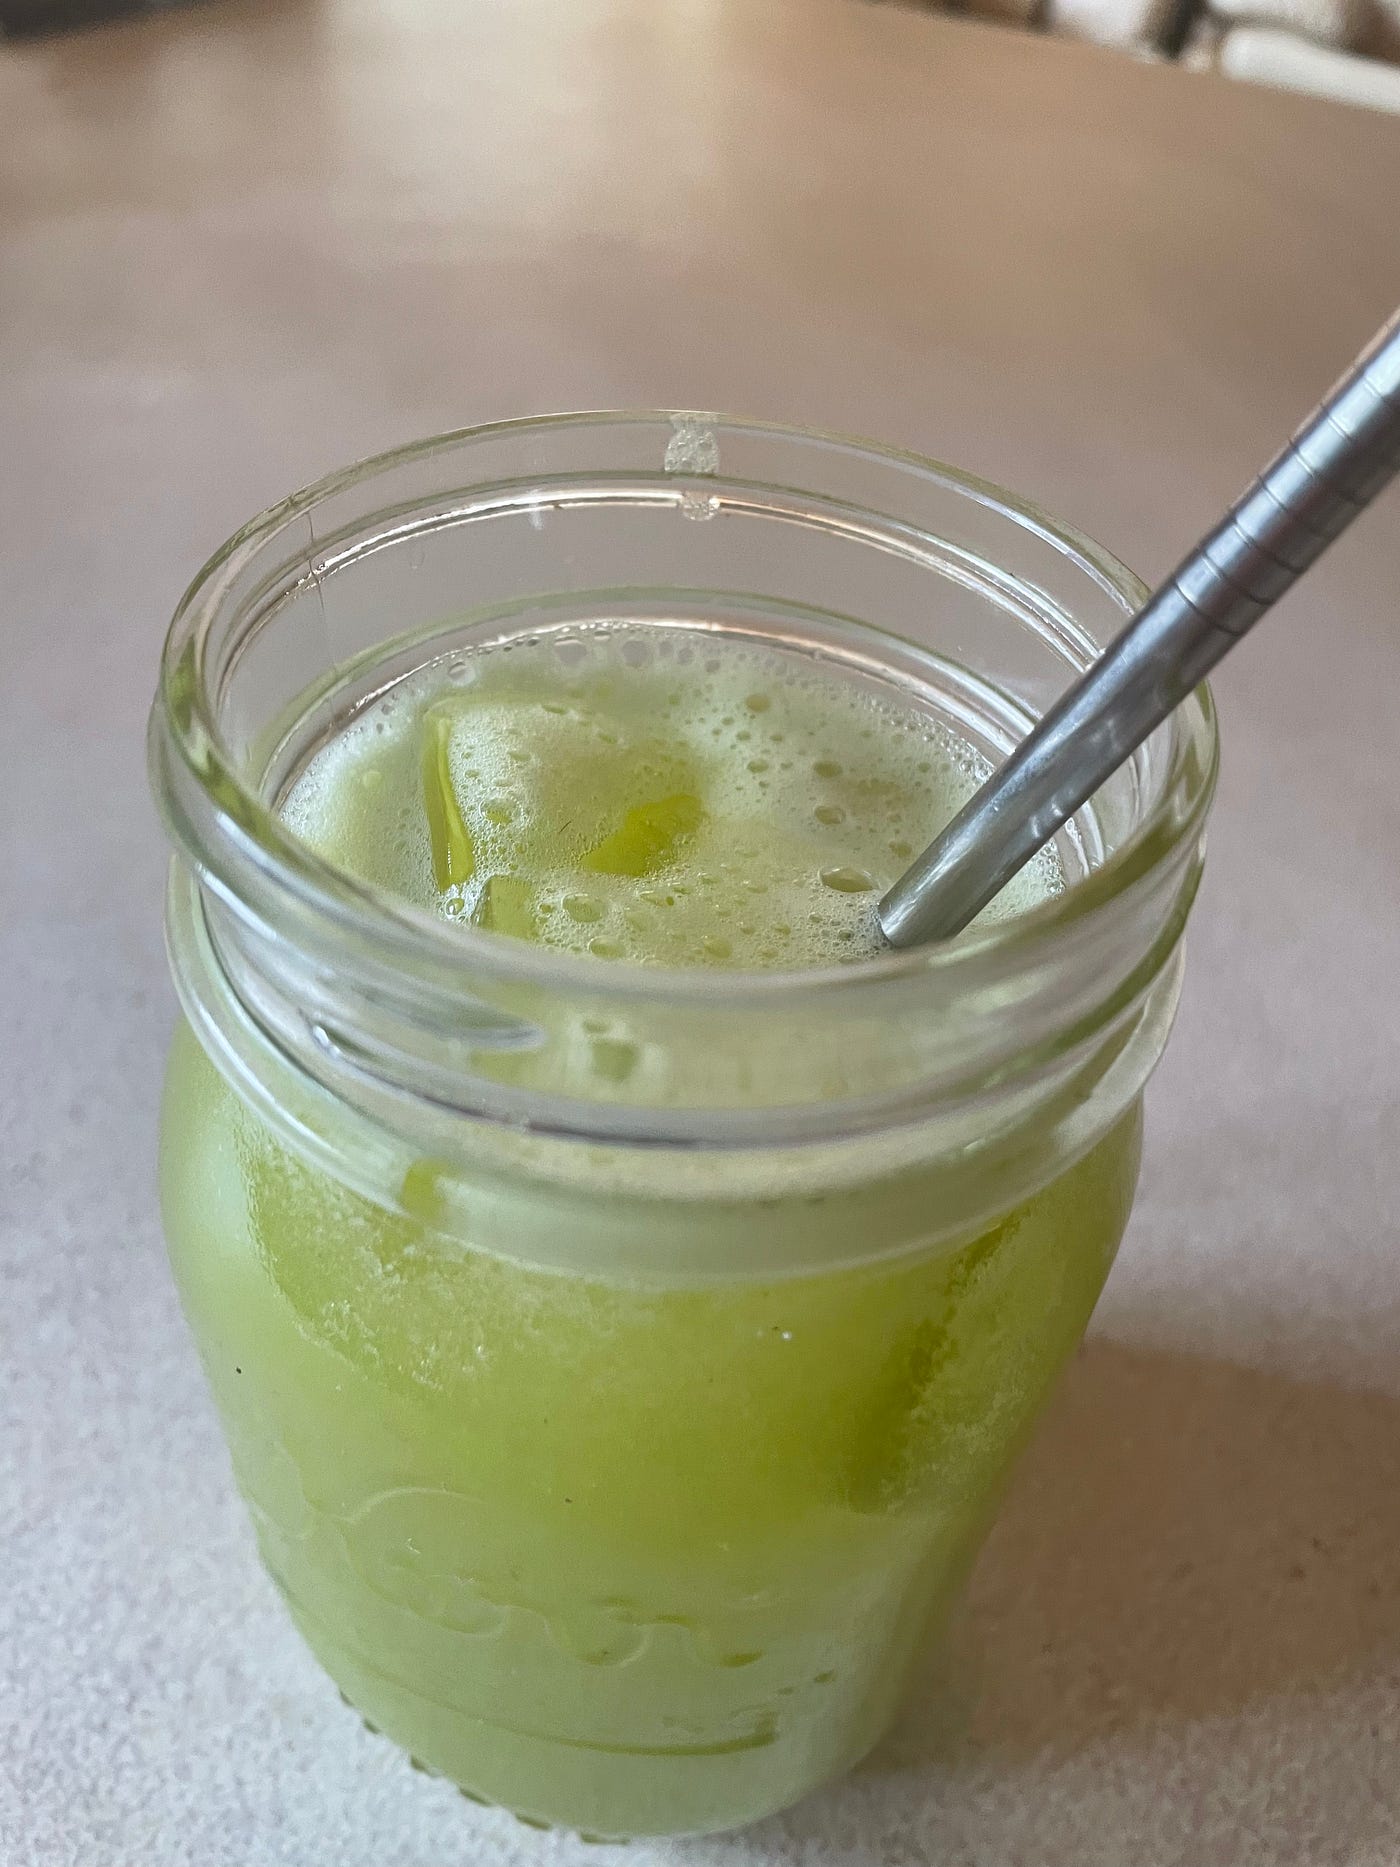 Iced celery juice in a glass jar with a straw on the counter.